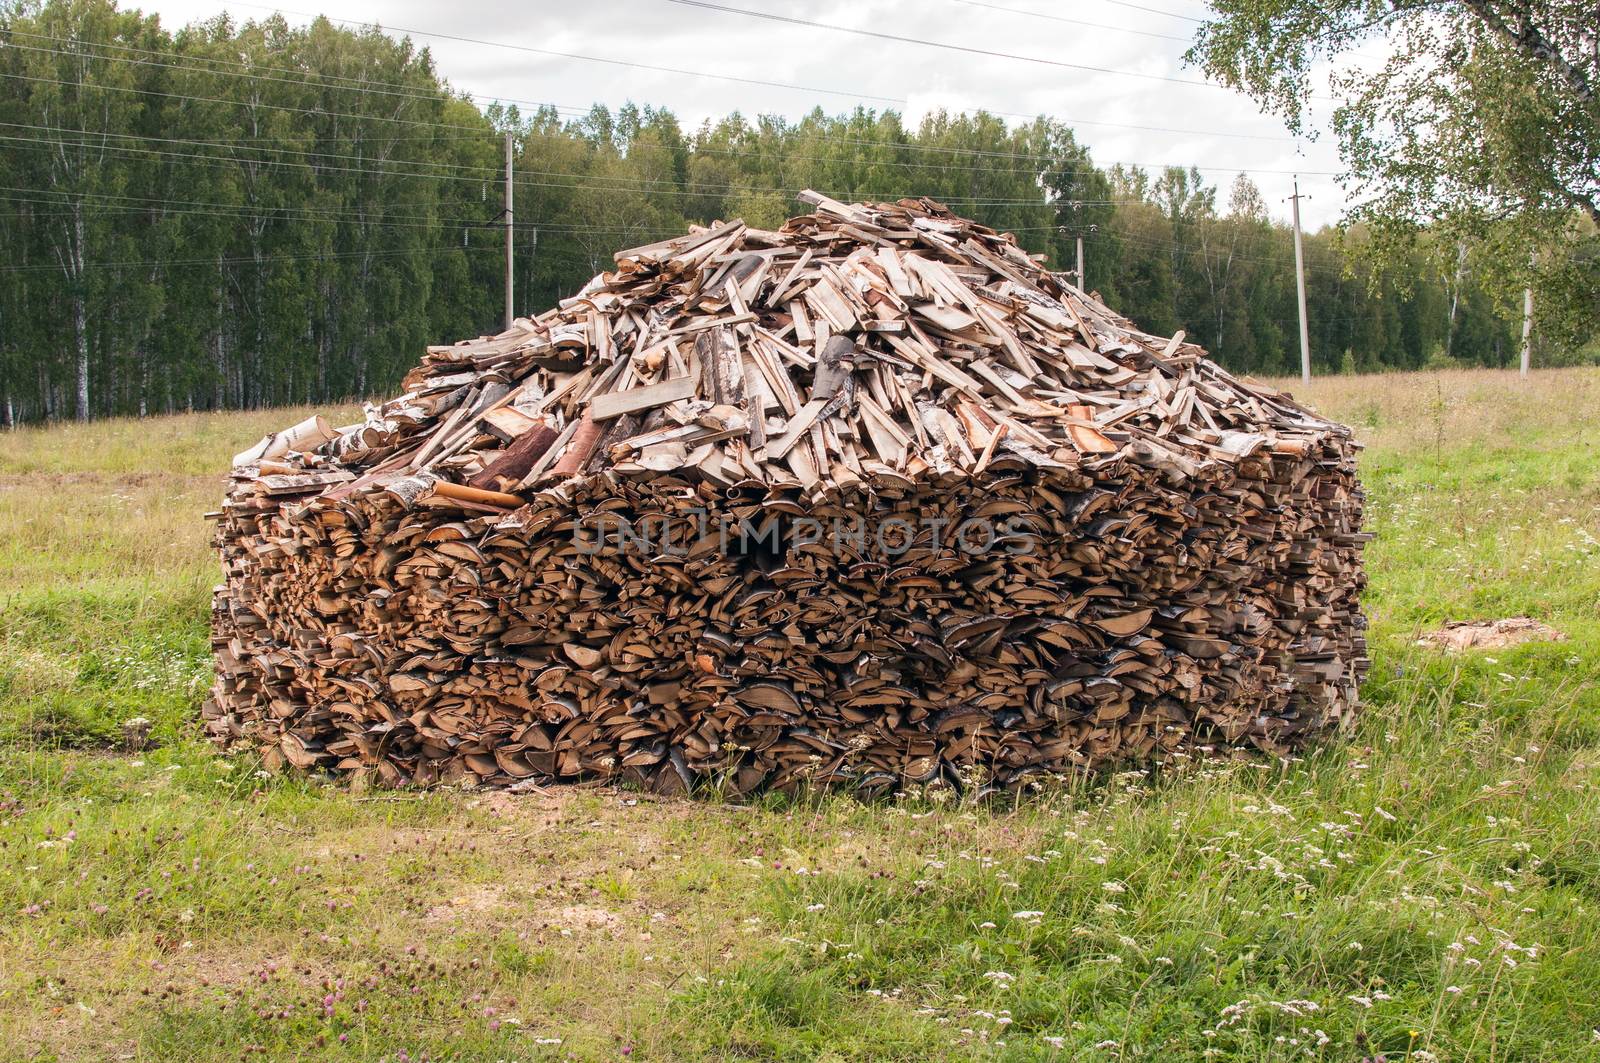 A Stack of Firewood in a Forest Glade by alexcoolok